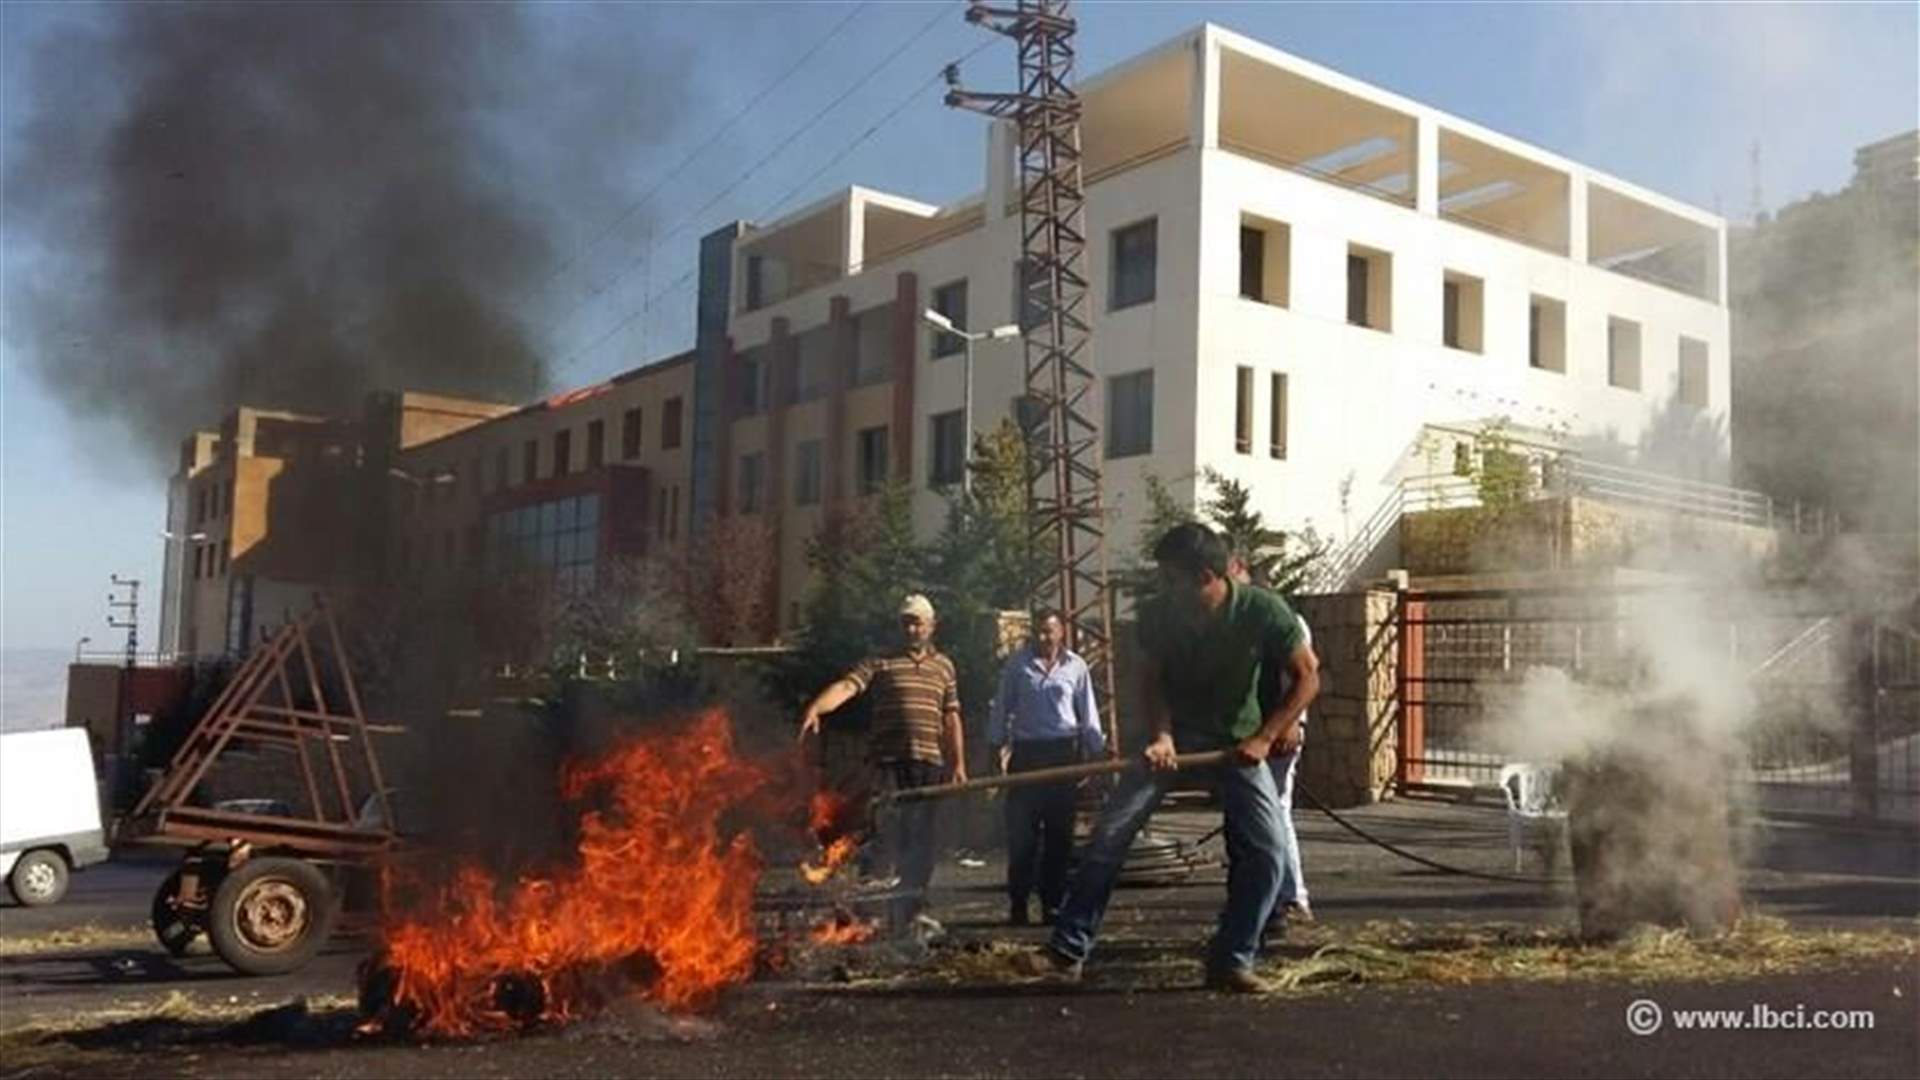 Employees of closed Shebaa hospital burn tires to protest their discharge